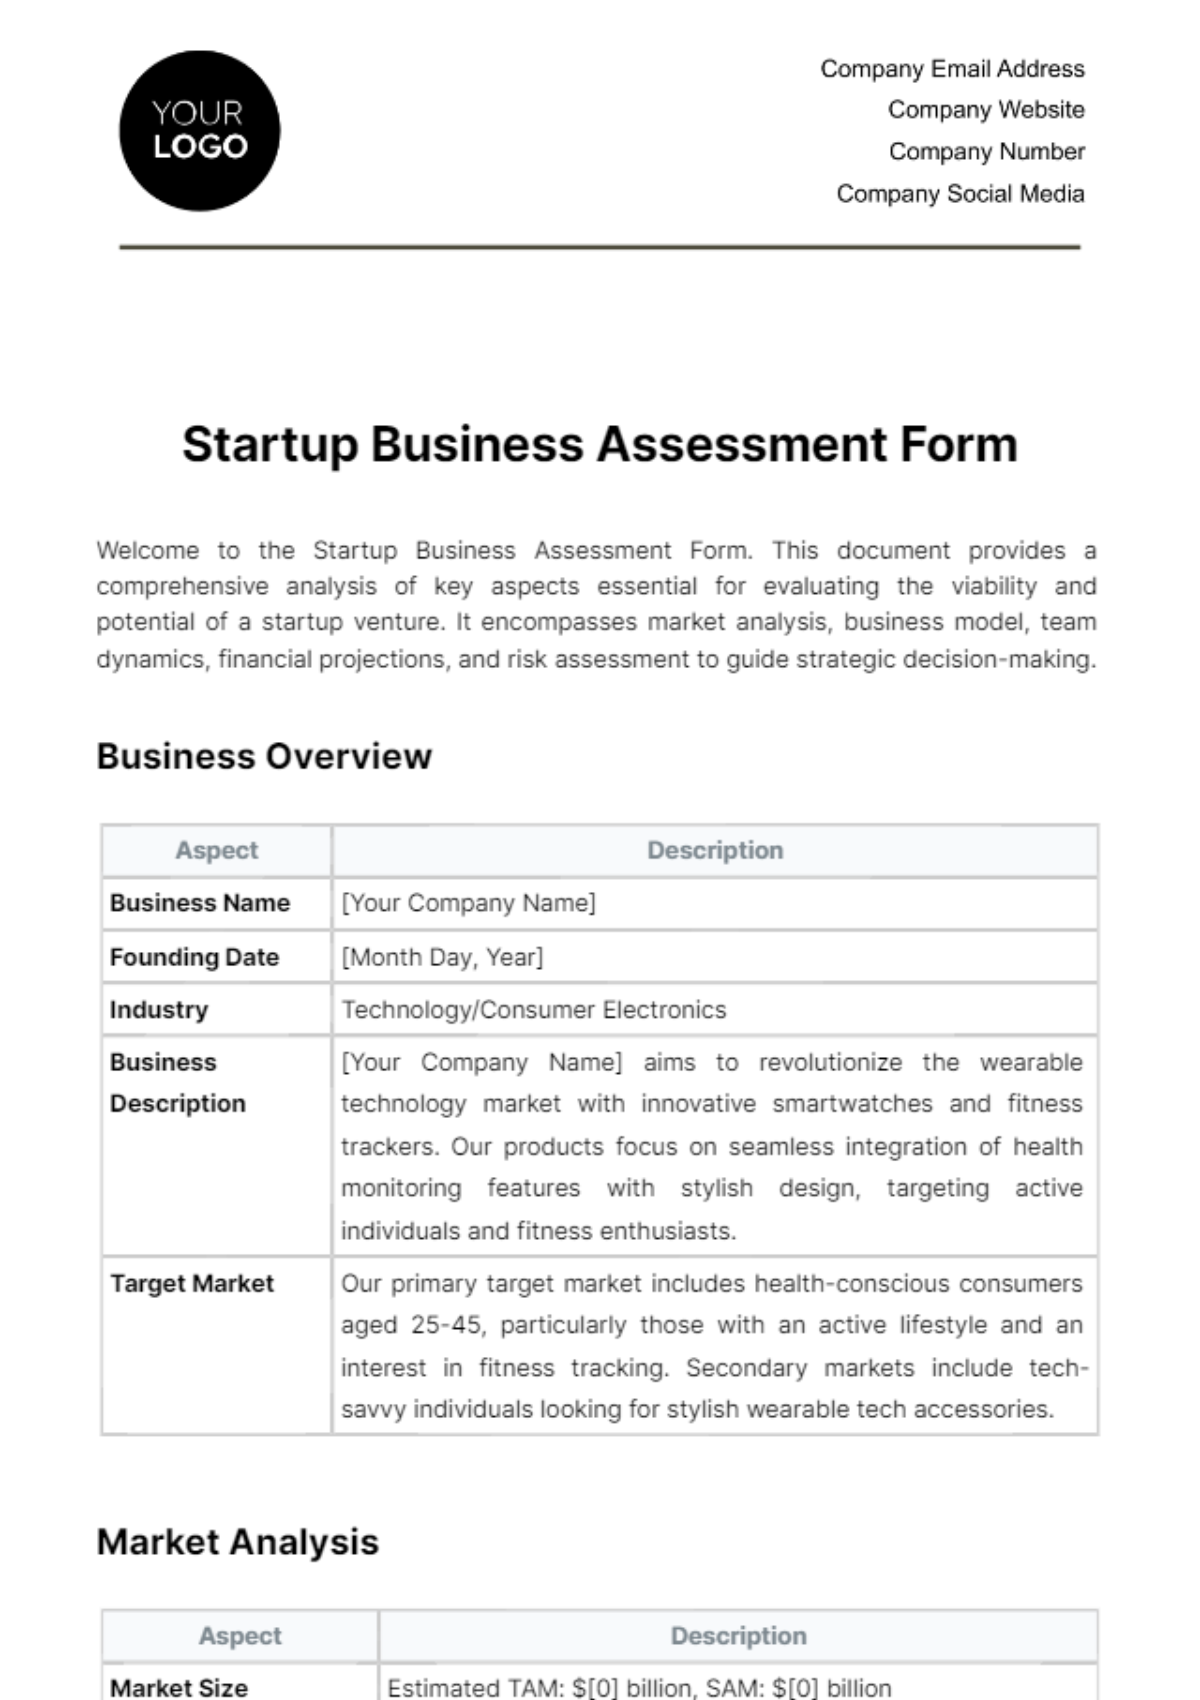 Startup Business Assessment Form Template